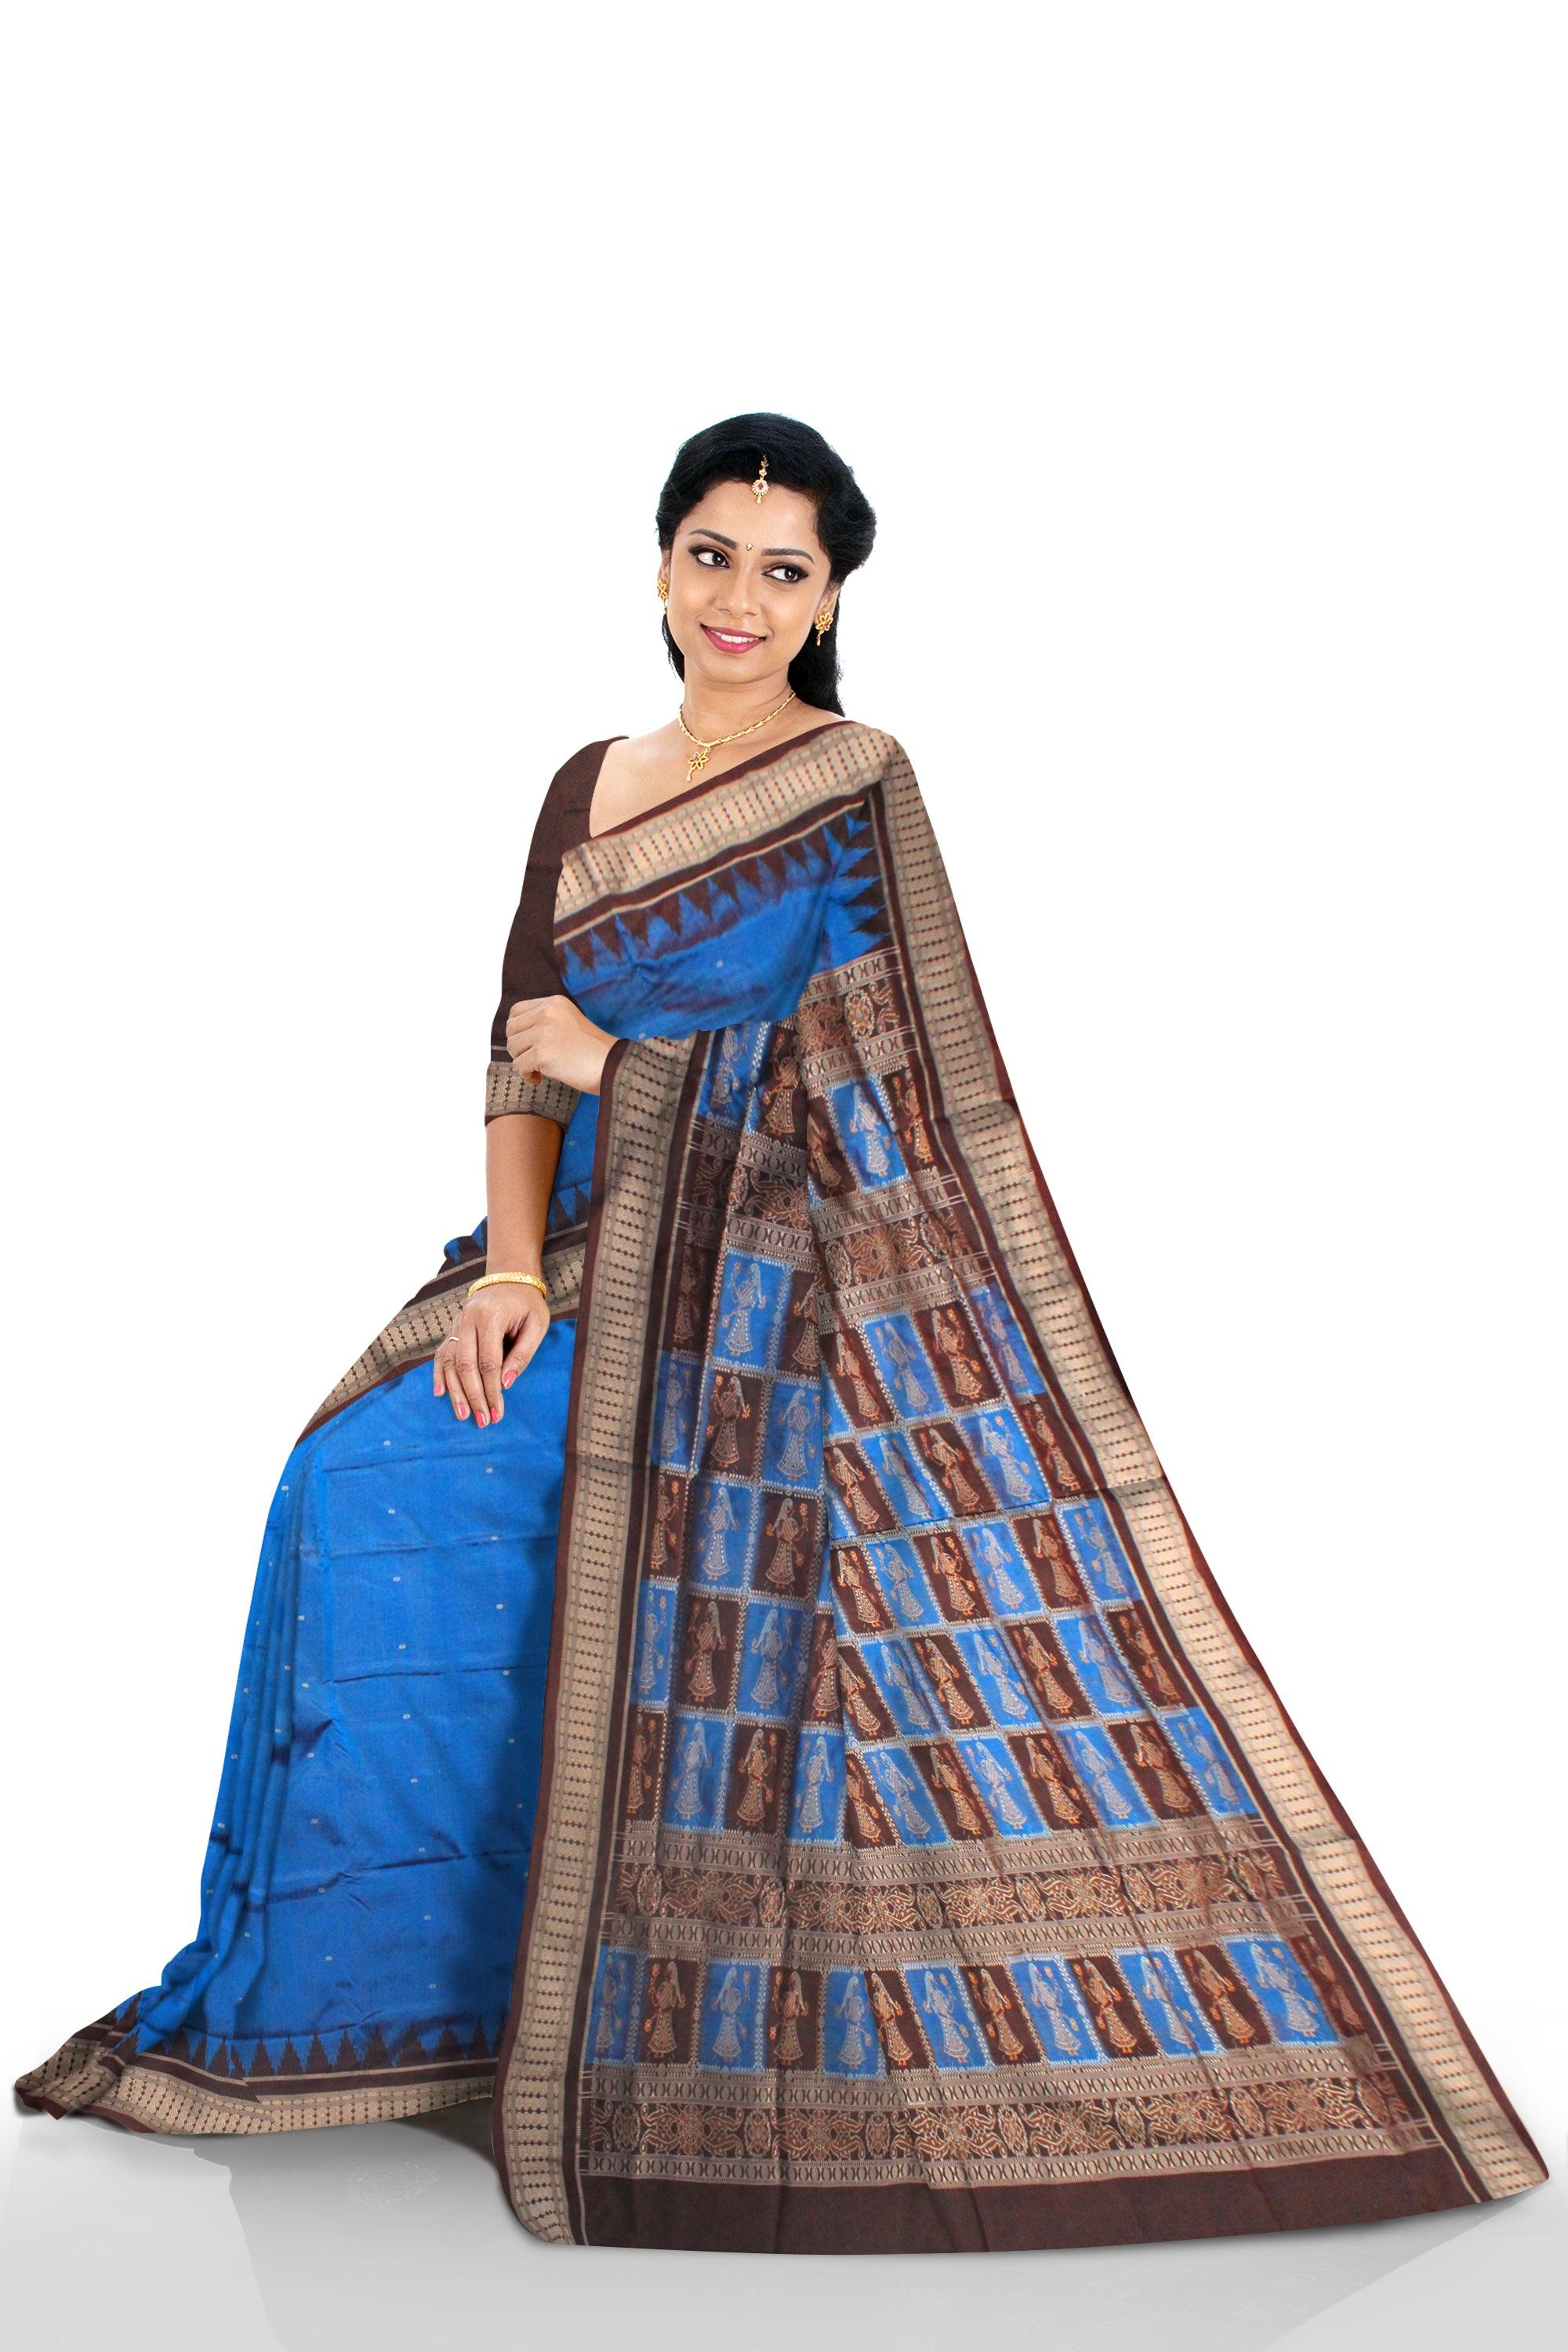 SONEPURI PATA SAREE IN BLUE AND COFFEE COLOR WITH BLOUSE. - Koshali Arts & Crafts Enterprise